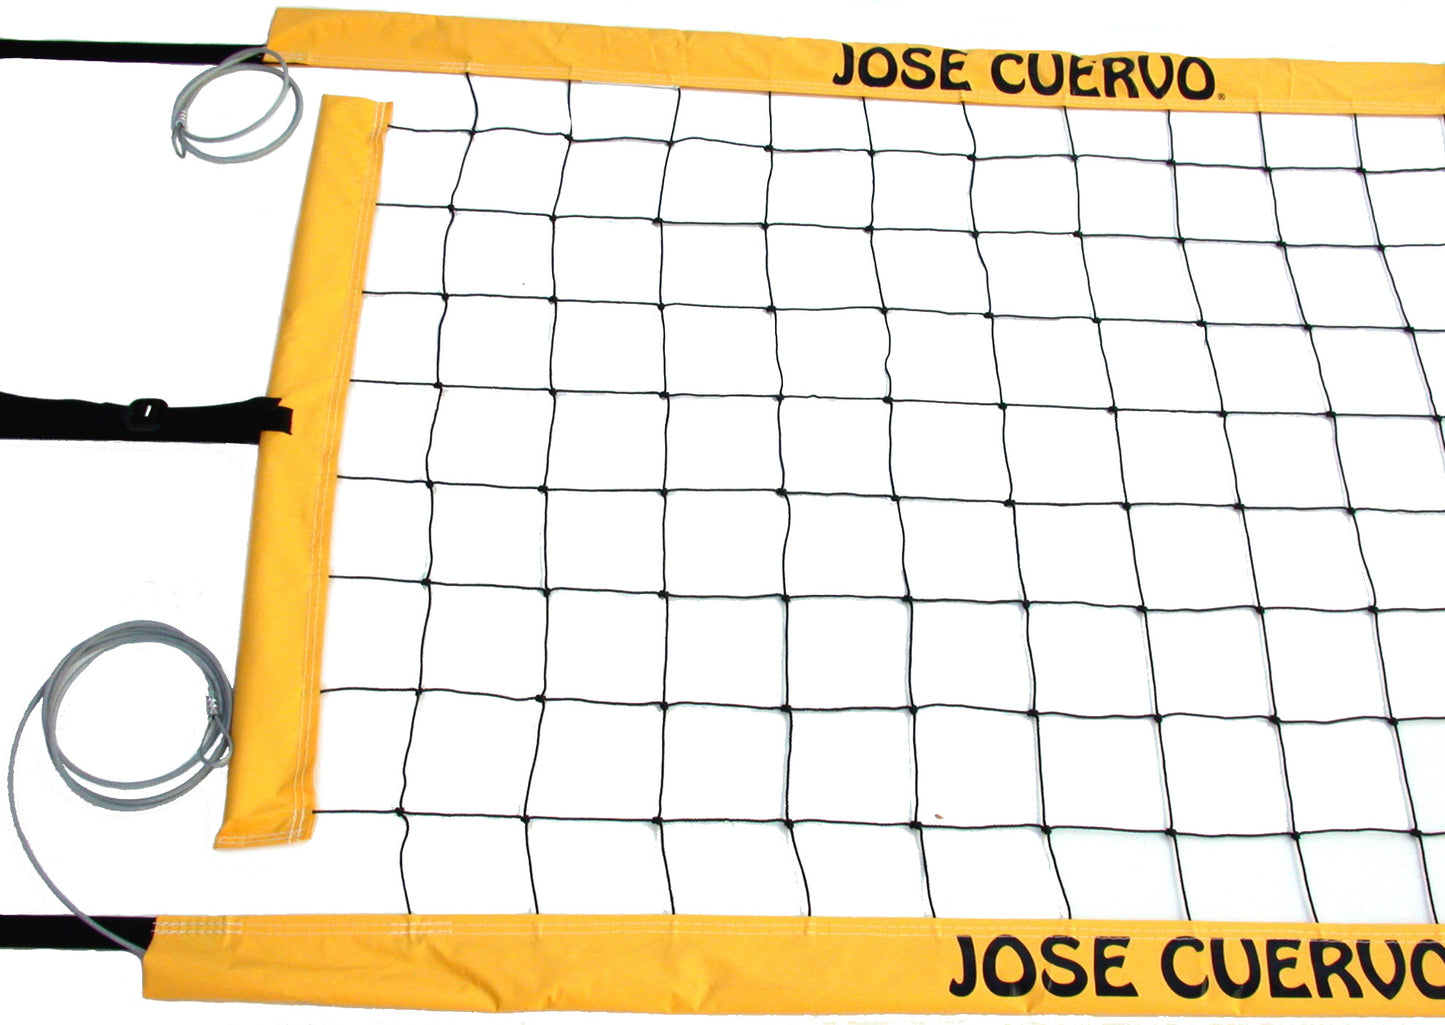 JCPNC-Jose Cuervo logo Power Volleyball Suspension Net Aircraft Cable Yellow Vinyl